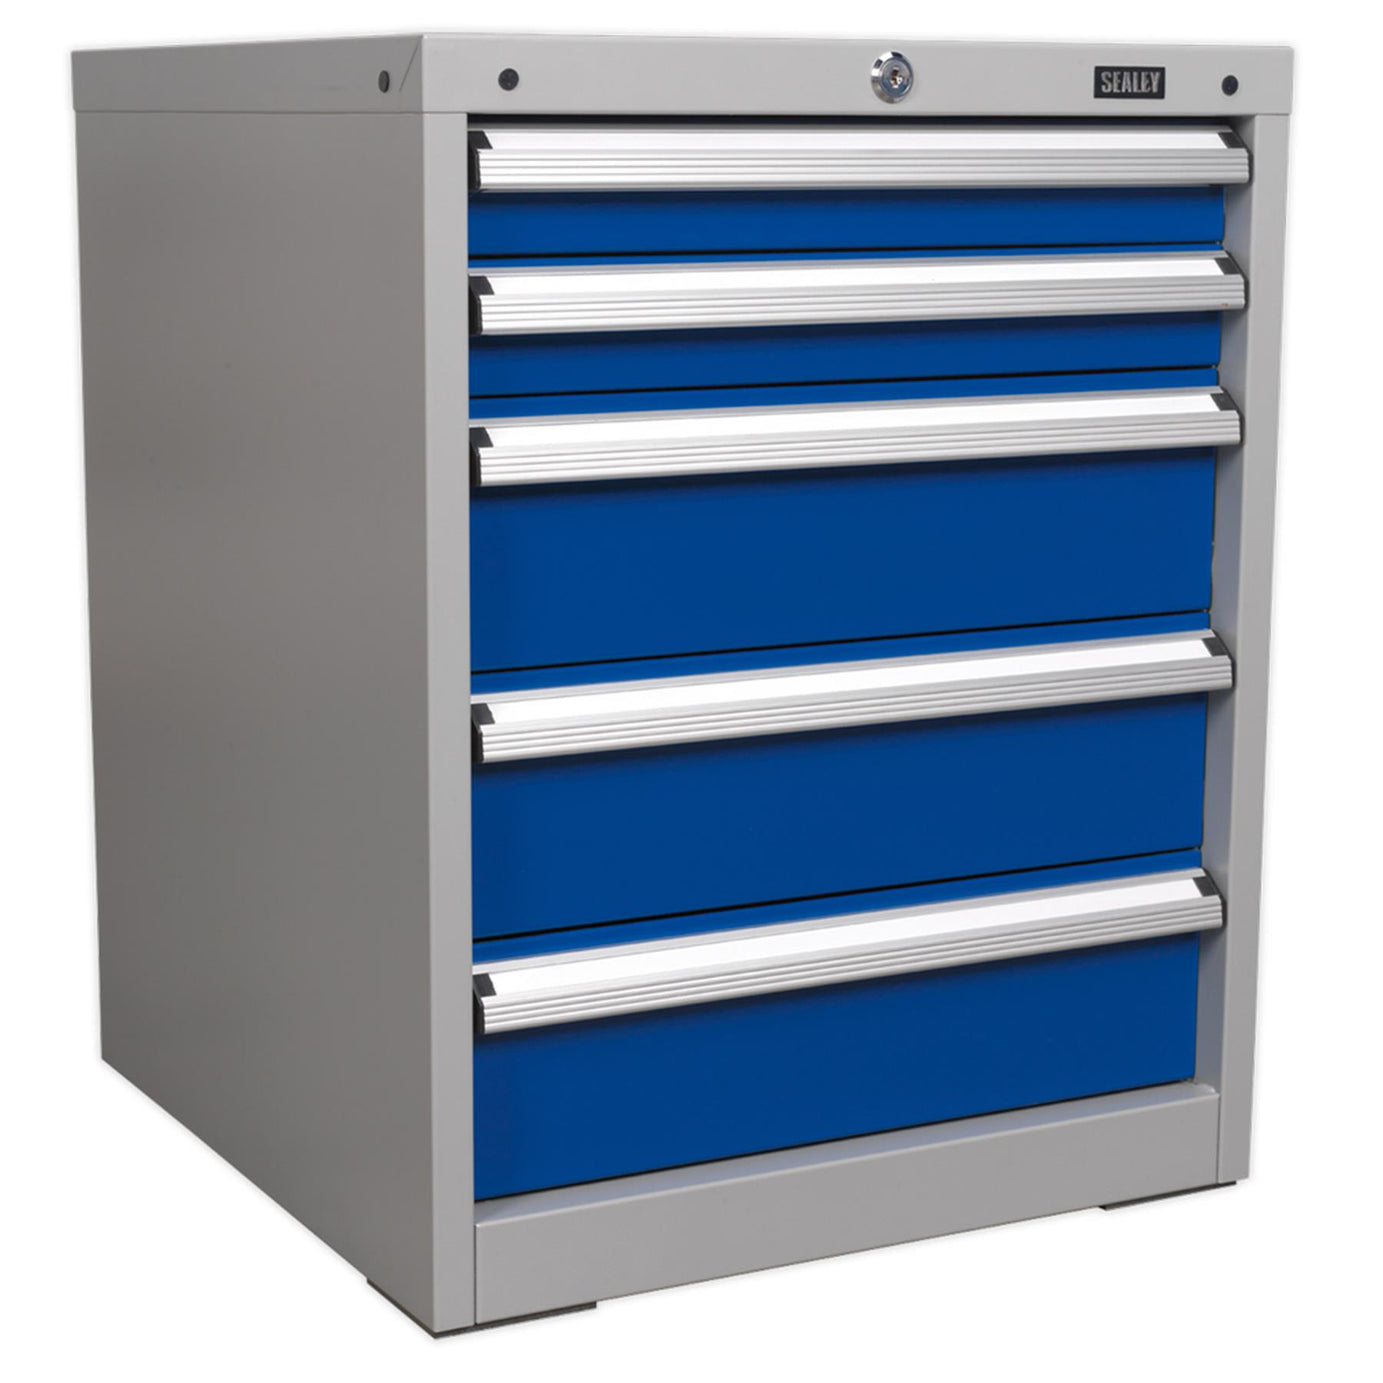 Sealey Cabinet Industrial 5 Drawer with a safety locking catch